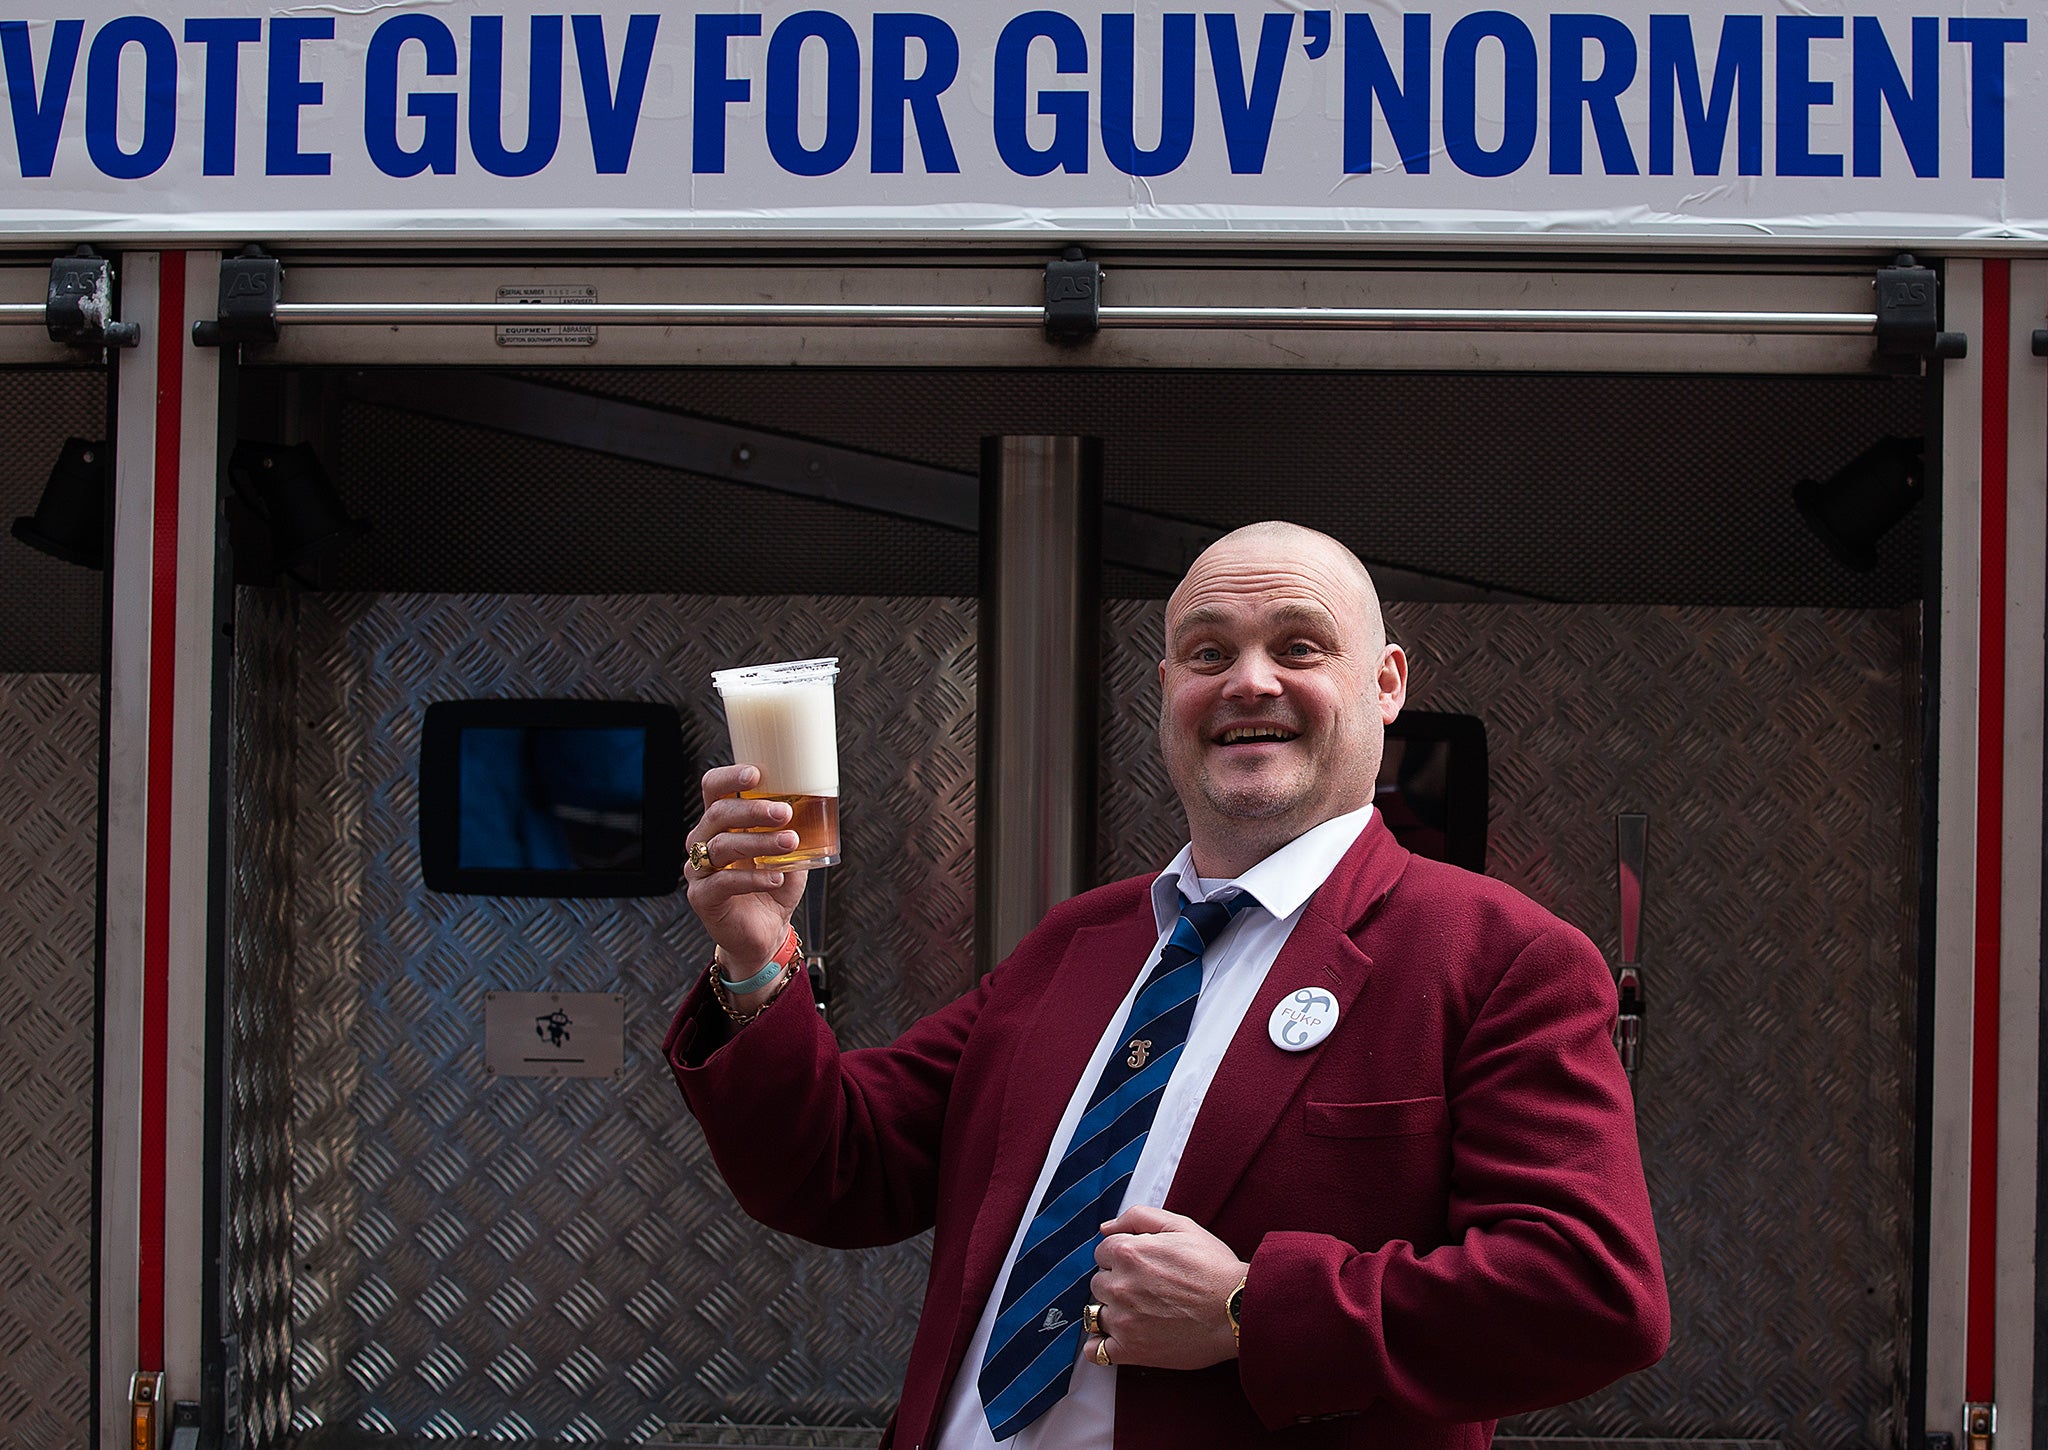 Al Murray, the Pub Landlord and Free United Kingdom Party member, has strong views on the upcoming election